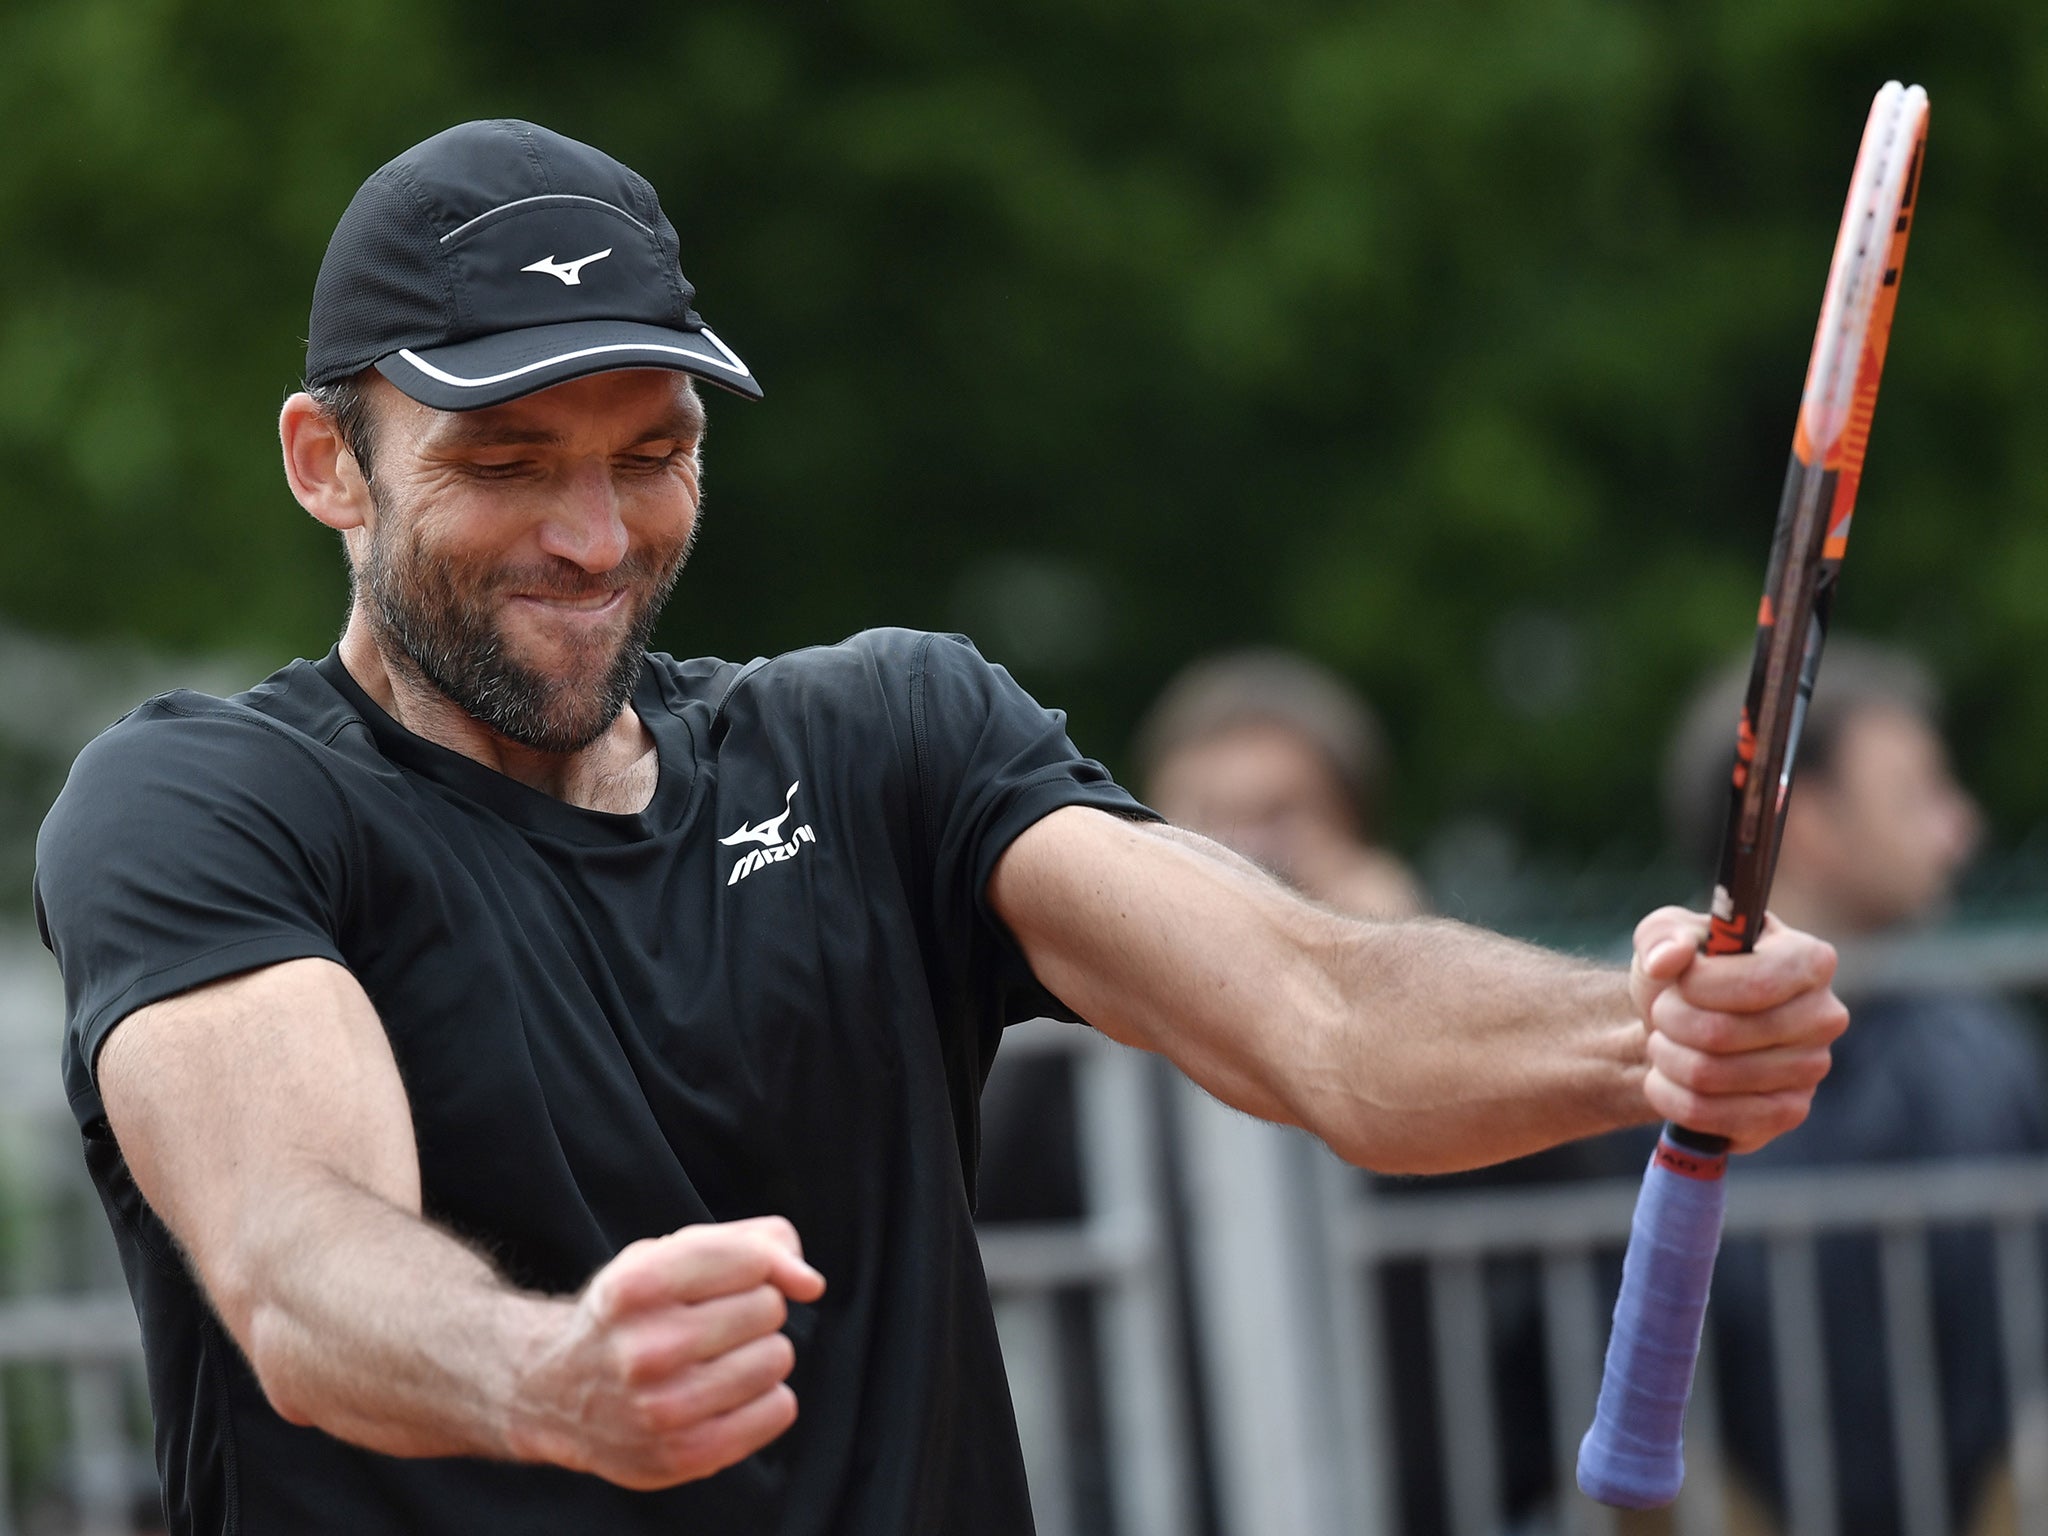 Ivo Karlovic, 37, is the oldest man to reach the third round of a Slam since Jimmy Connors back in 1991